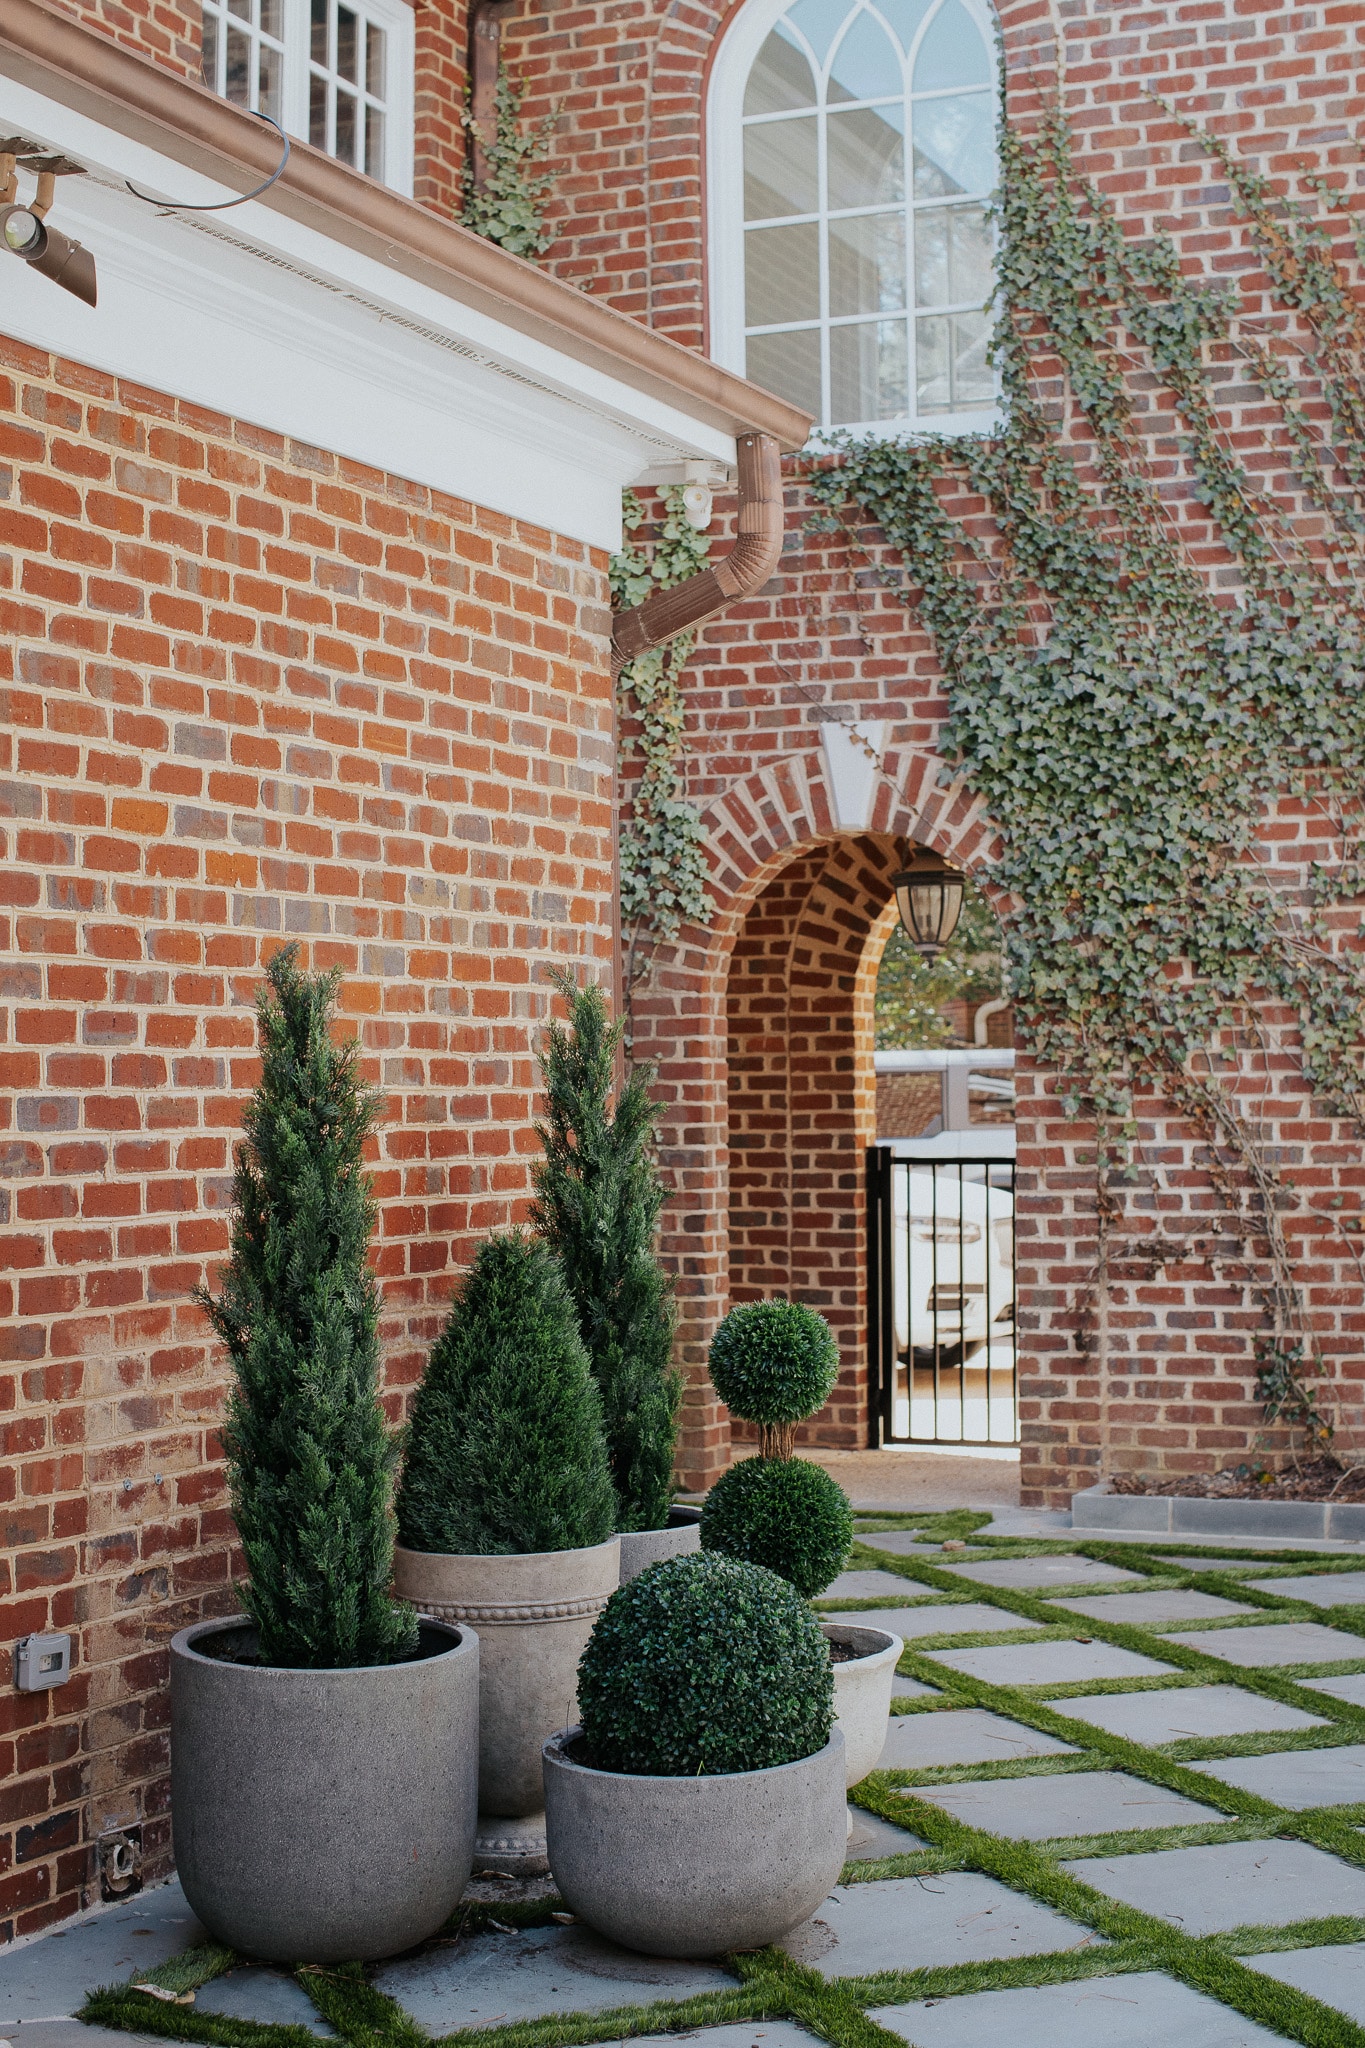 Chris Loves Julia | Outdoor planters with faux boxwood in front of brick house